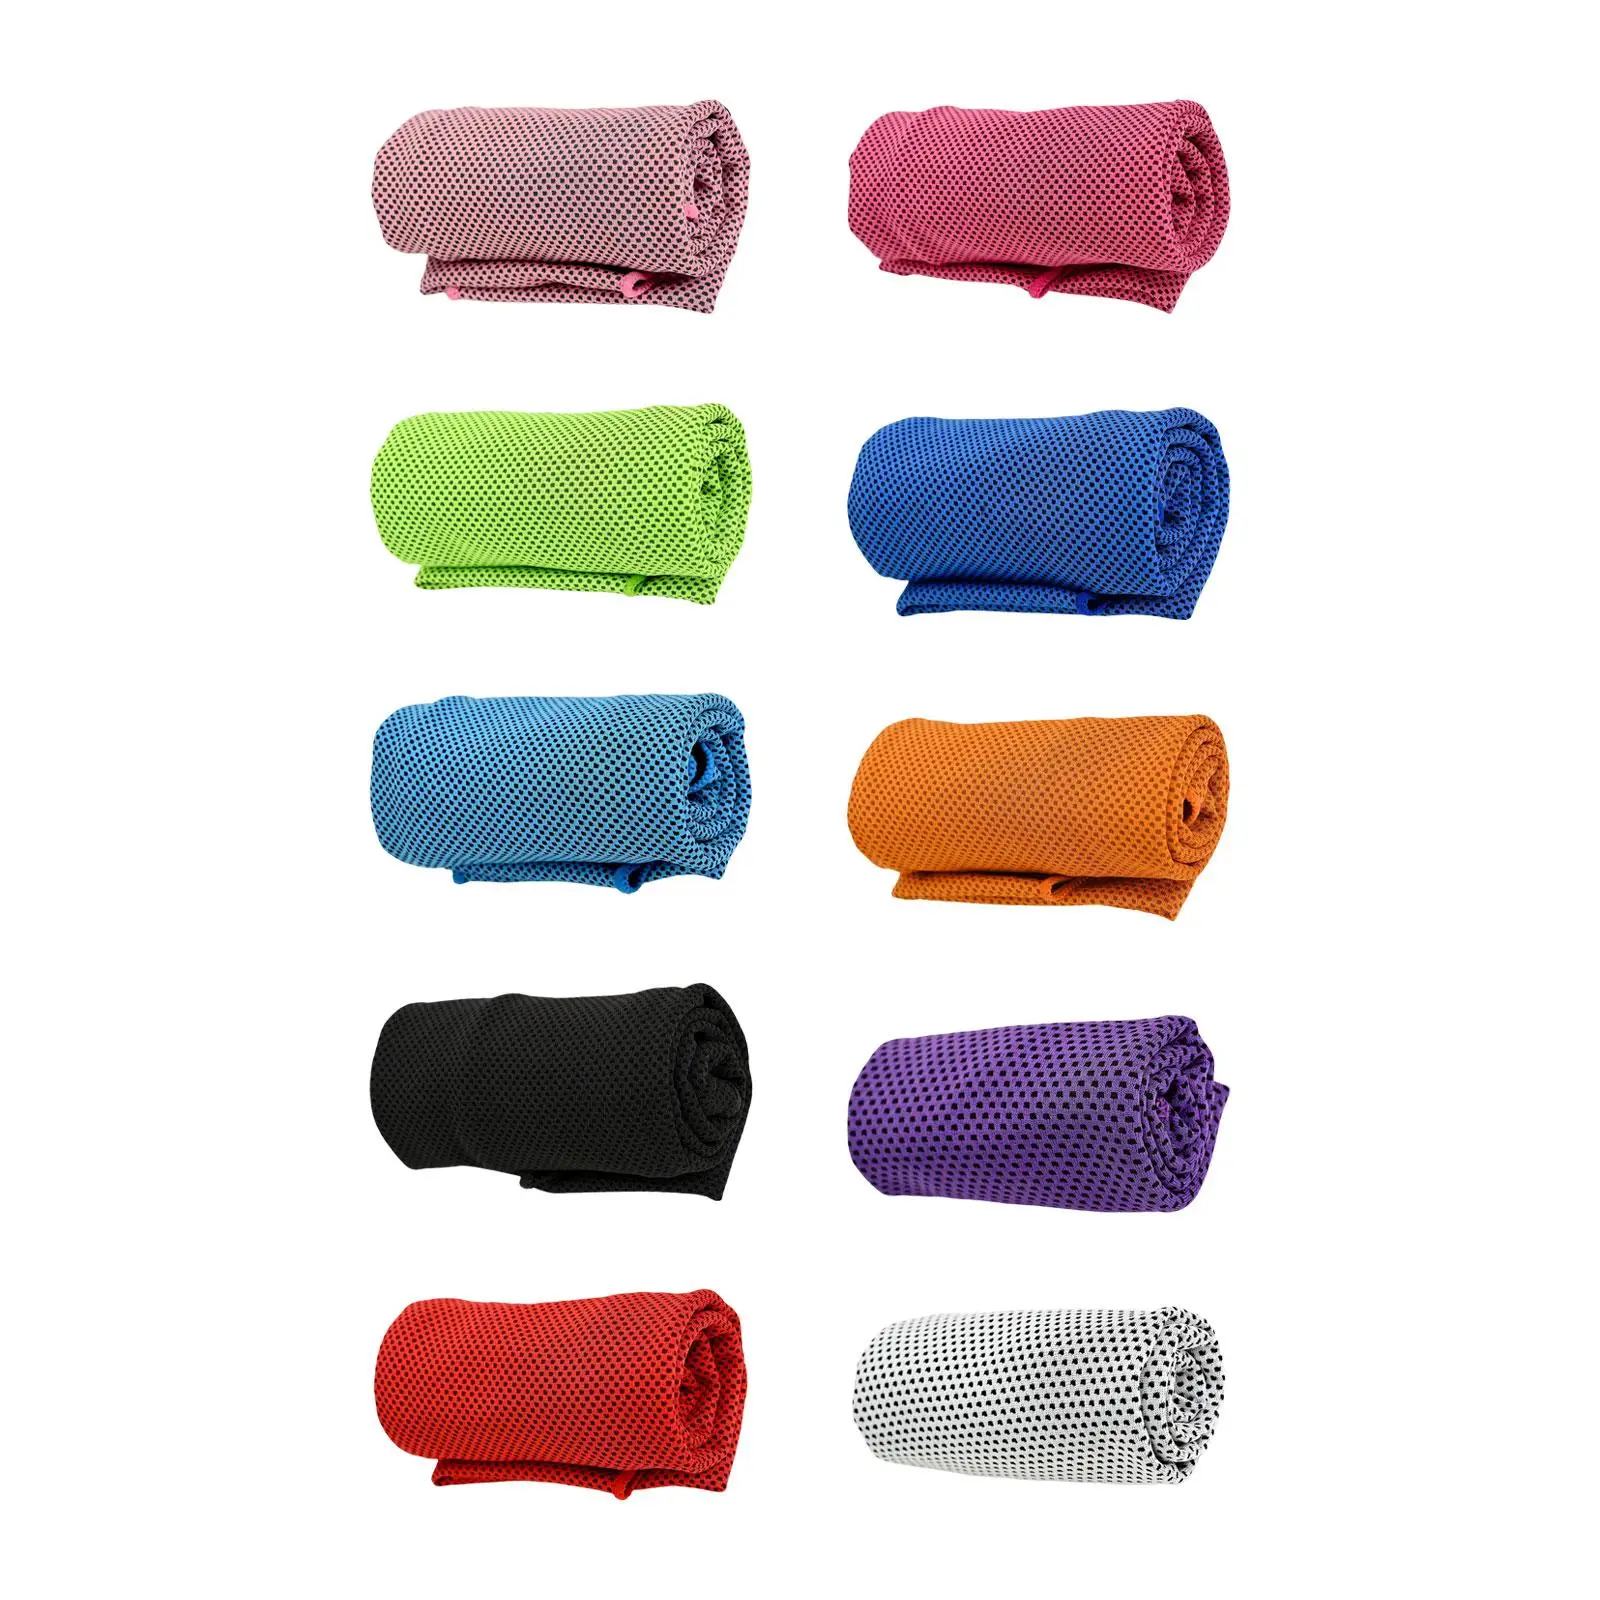 Cool Towel Sweat Absorbing 30x80cm/12inchx32inch for Hot Weather Soft Chilly Towel for Hiking Yoga Football Camping Fitness